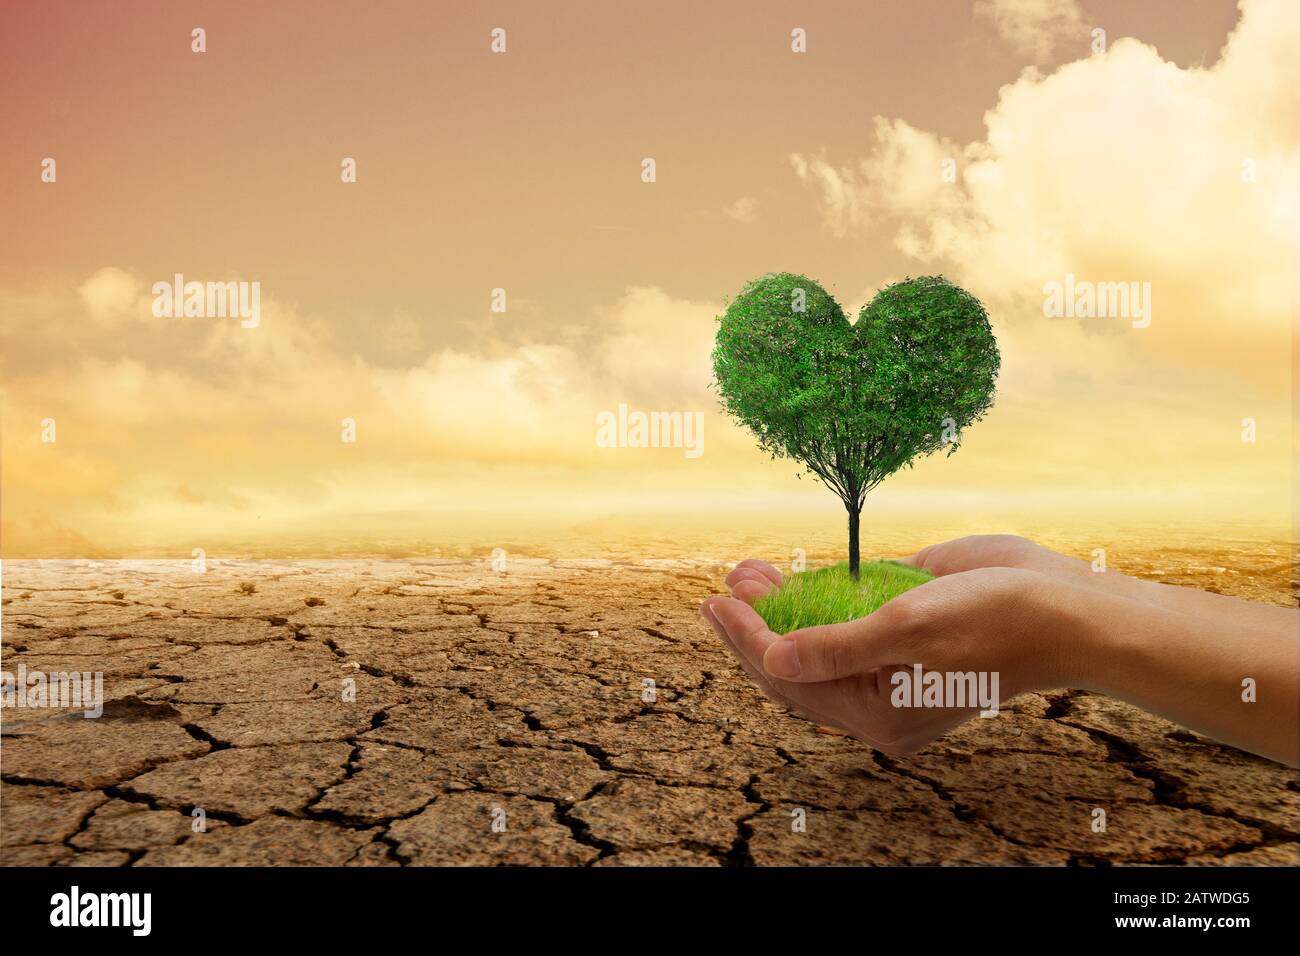 Environmental problems,Protect nature and save the world . A small green heart tree in hand, ready to plant, with a background that is arid and cracke Stock Photo